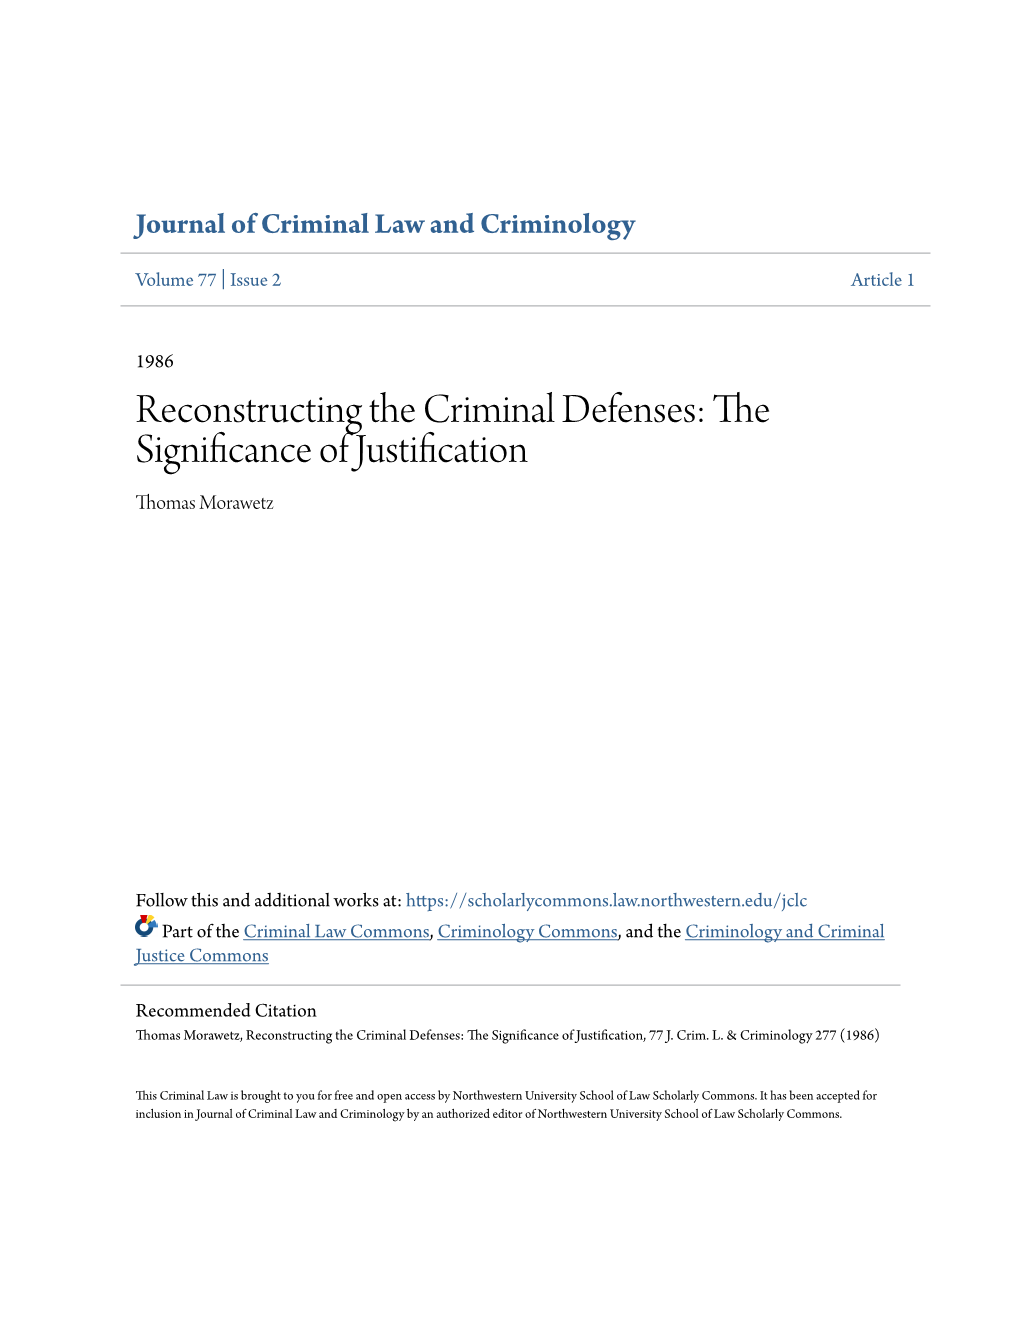 Reconstructing the Criminal Defenses: the Significance of Justification Thomas Morawetz